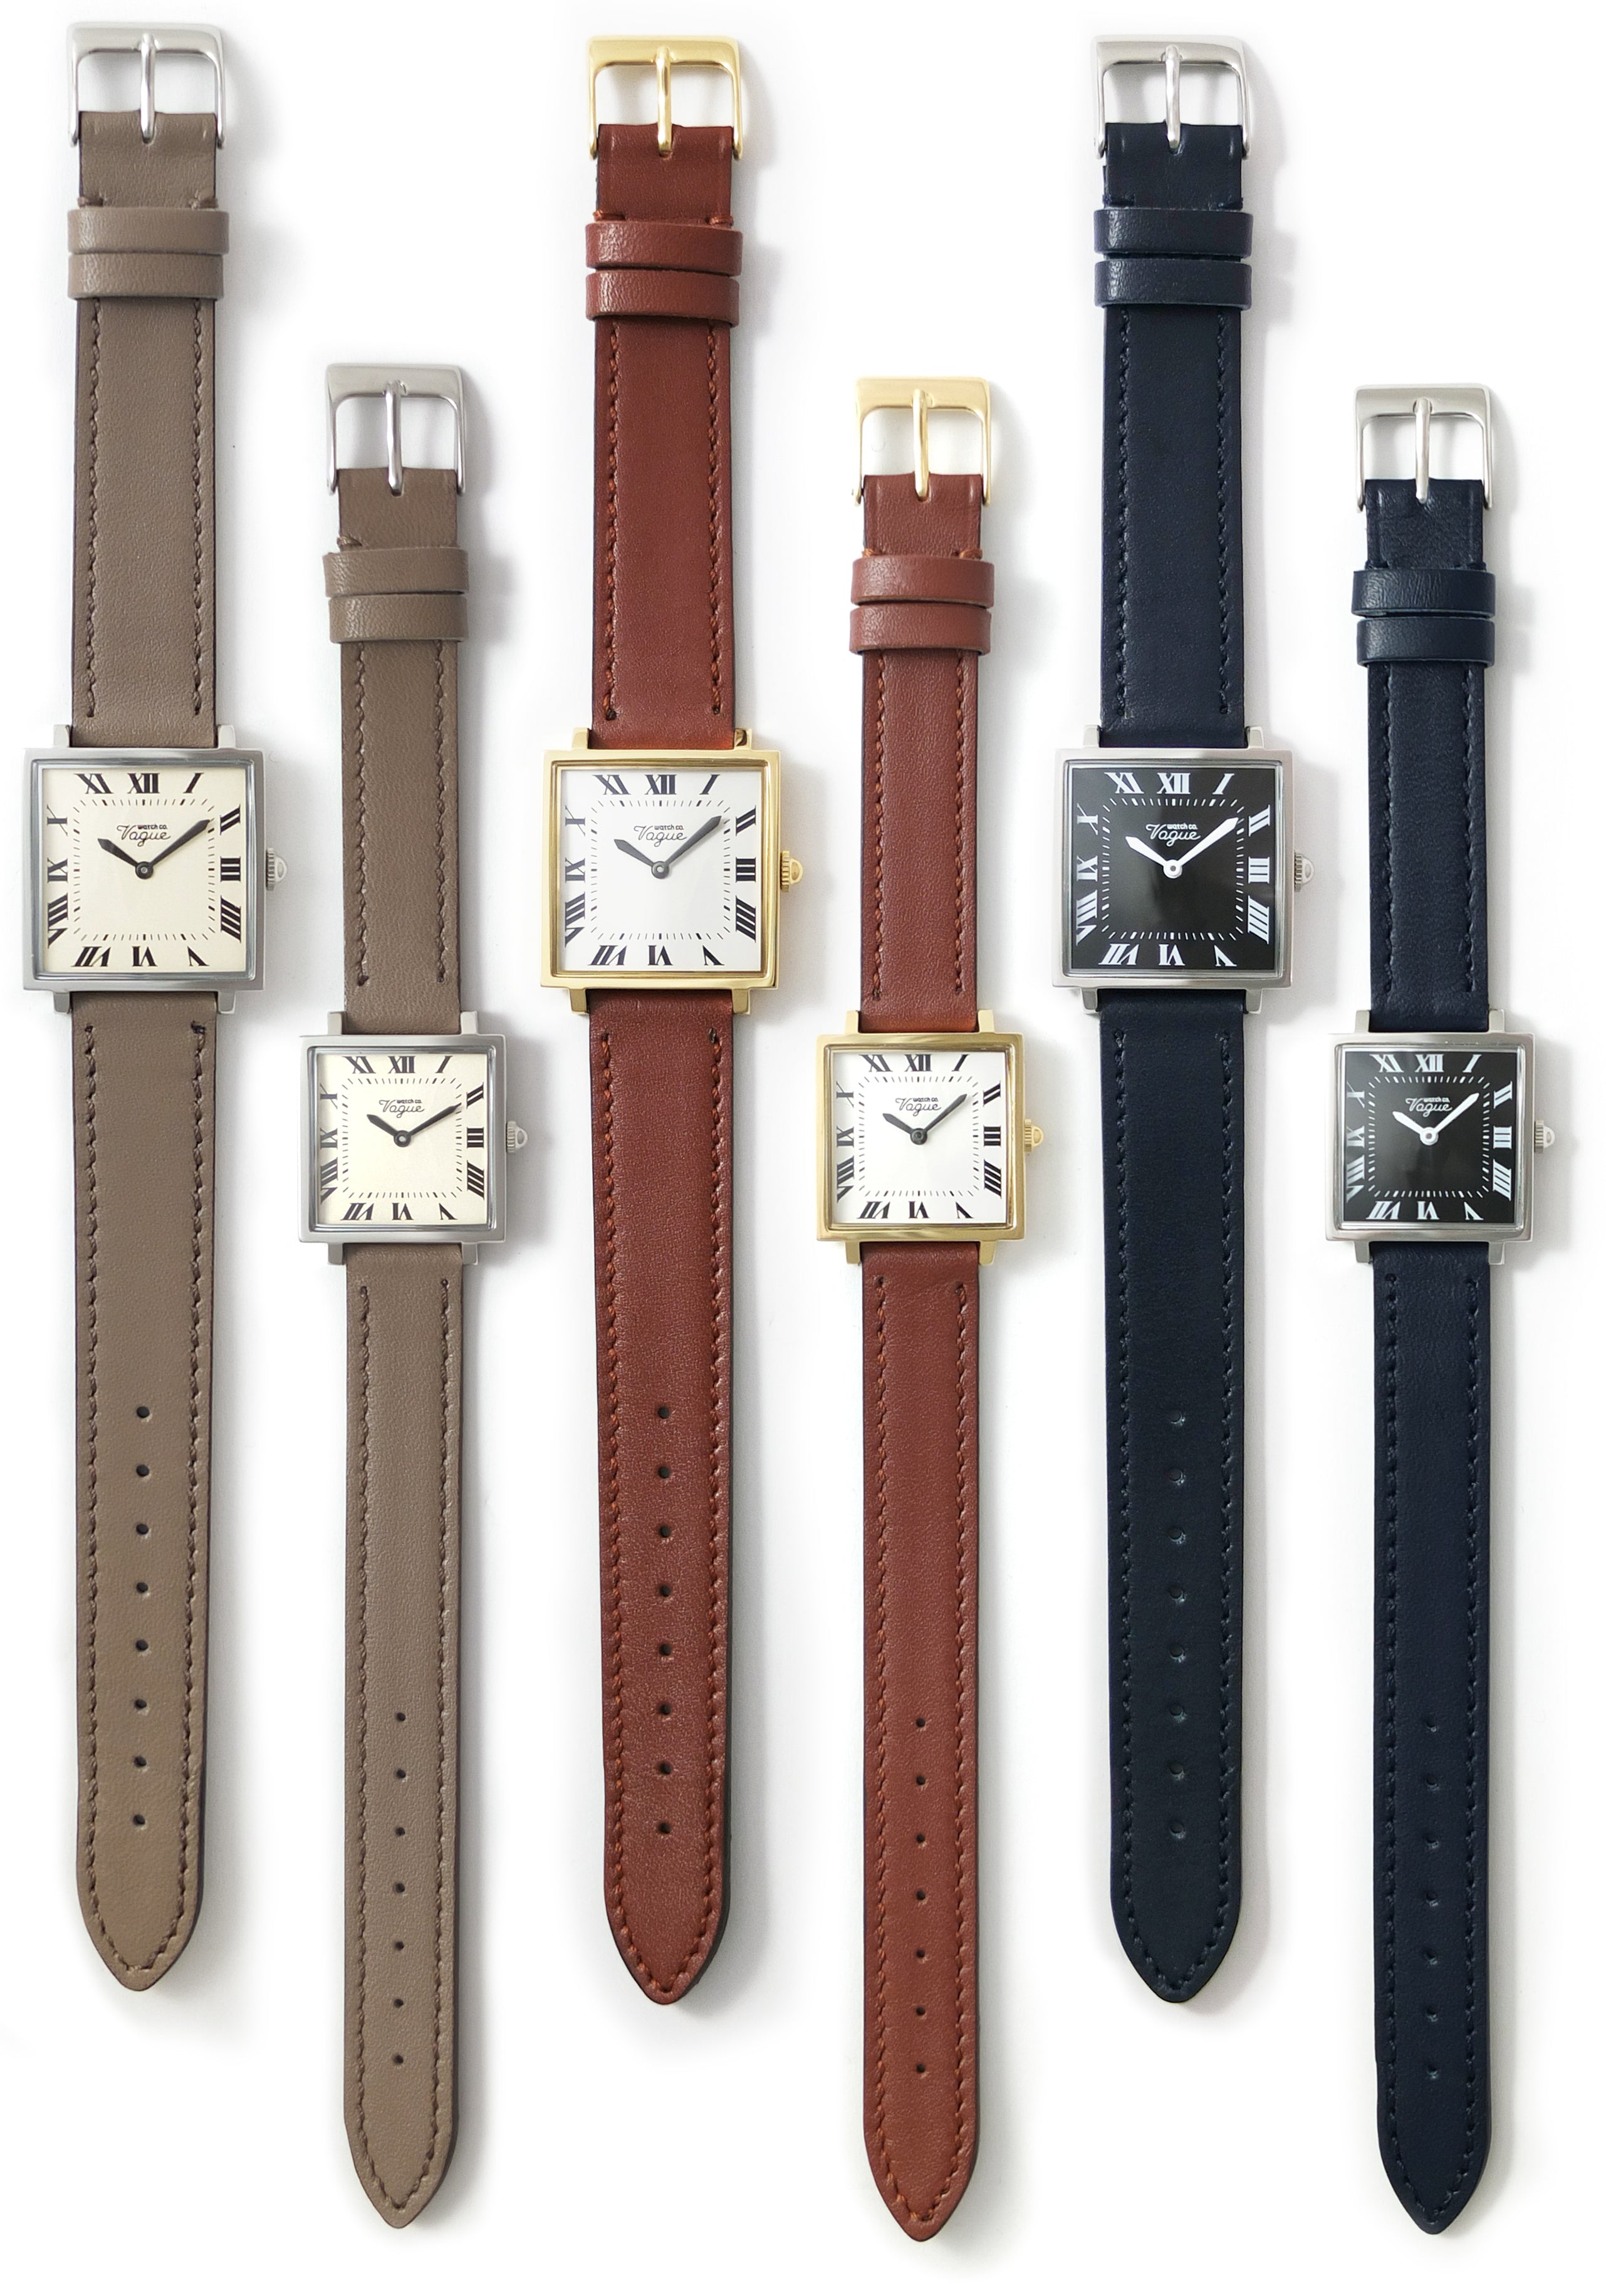 vague watch carre 稼働品